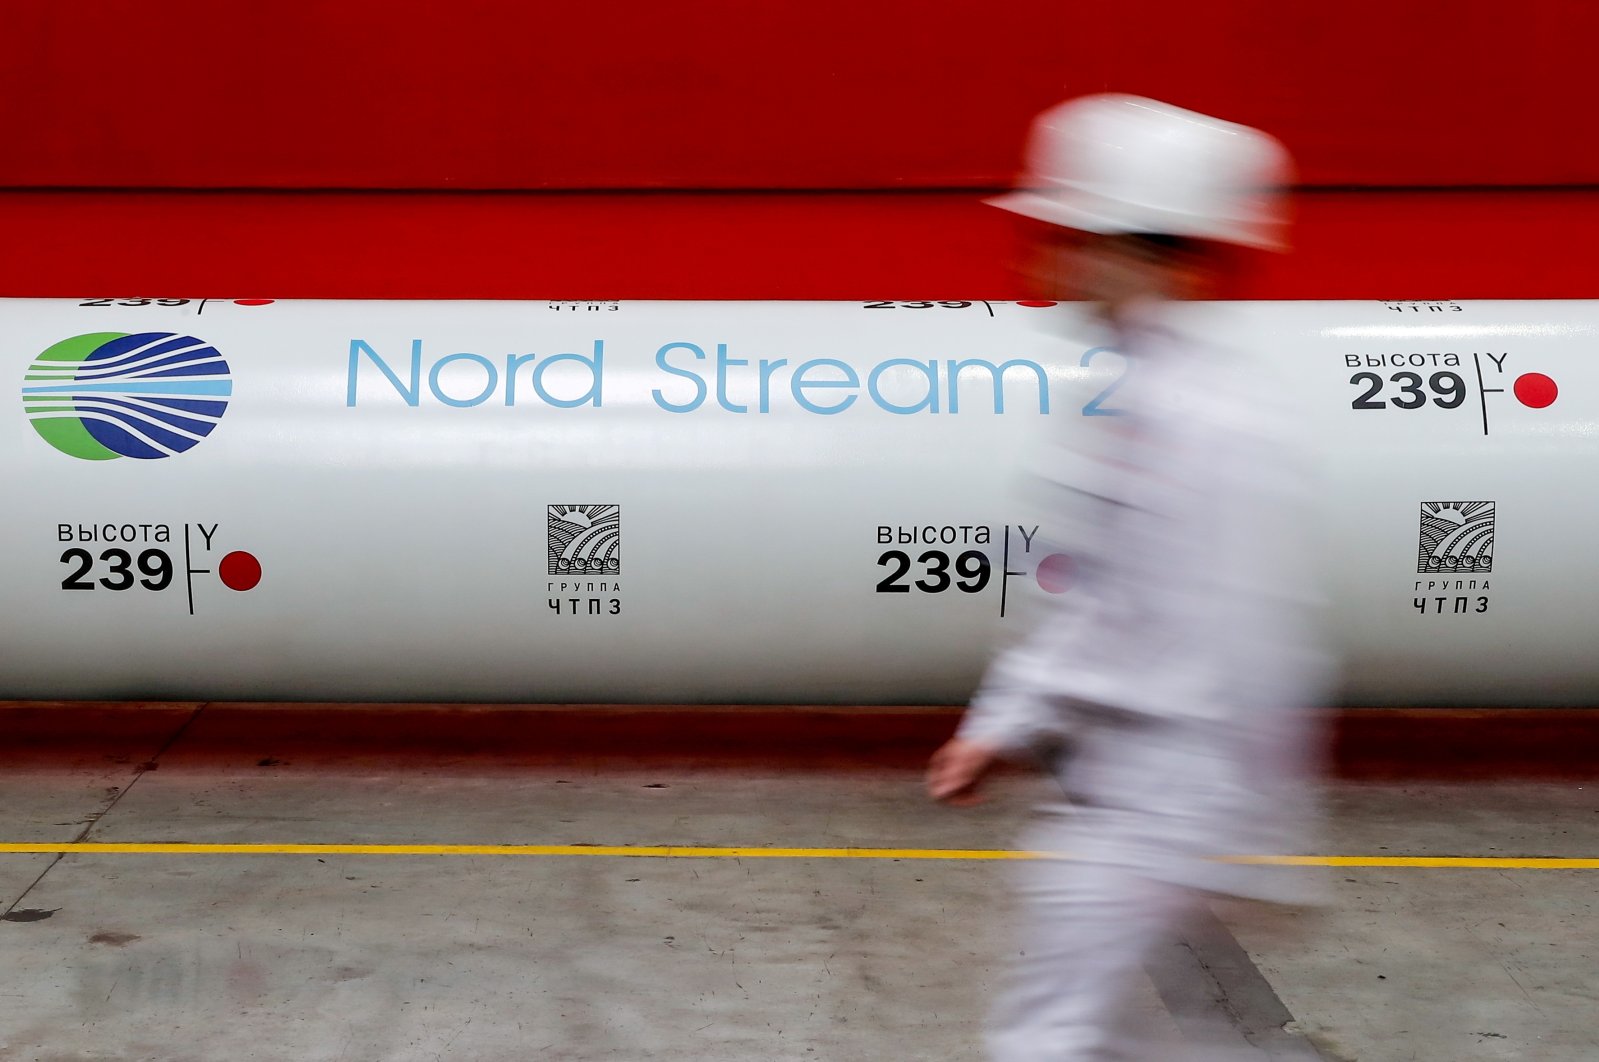 The logo of the Nord Stream 2 gas pipeline project is seen on a pipe at the Chelyabinsk pipe rolling plant in Chelyabinsk, Russia, Feb. 26, 2020. (Reuters Photo)